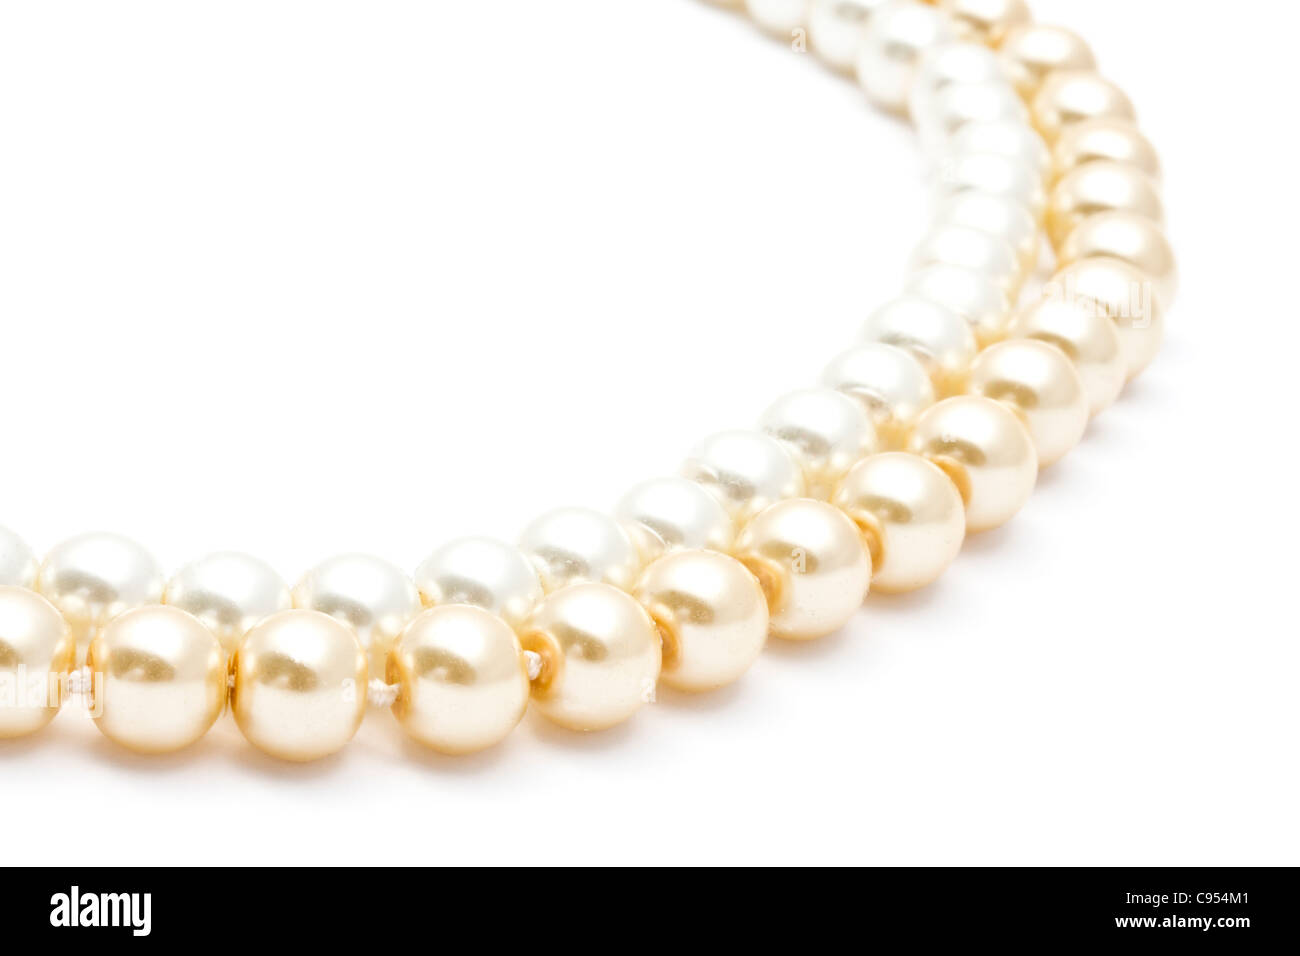 Beautiful pearl necklace closeup on white background Stock Photo